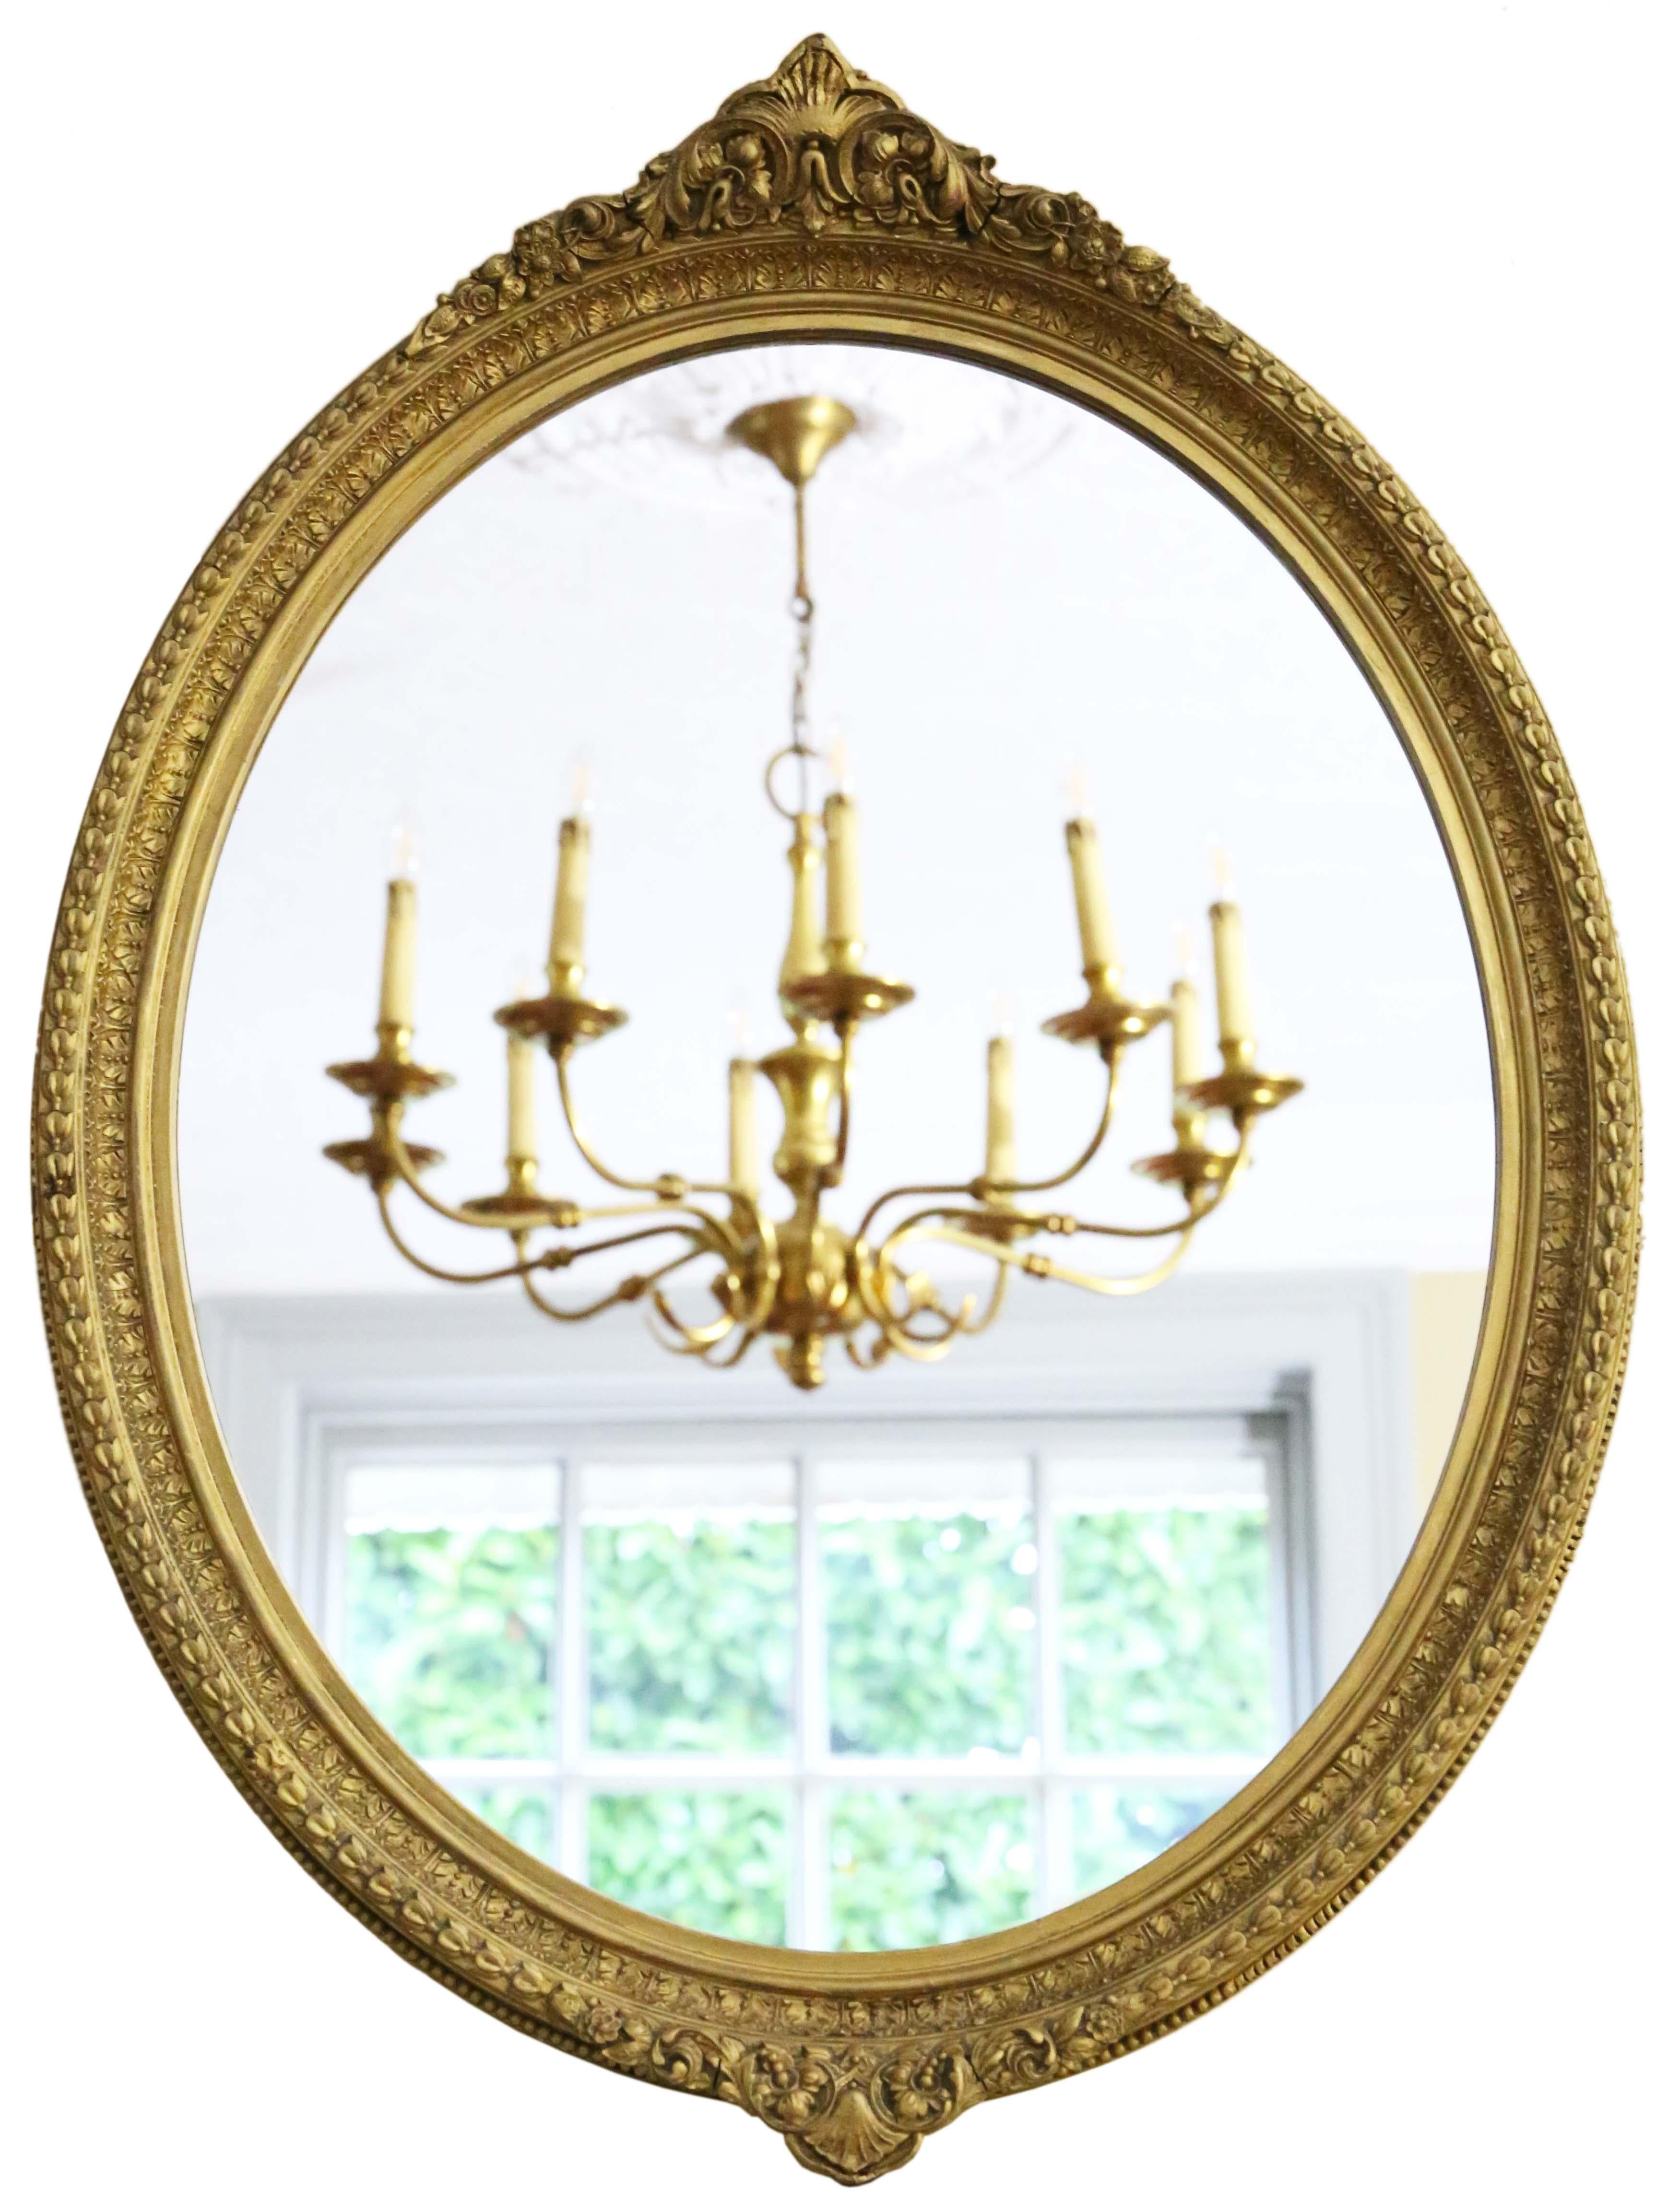 Antique quality oval gilt overmantle wall mirror 19th Century.

An impressive rare find, that would look amazing in the right location. No loose joints or woodworm.

The replacement mirrored glass is in very good condition.

The frame has minor